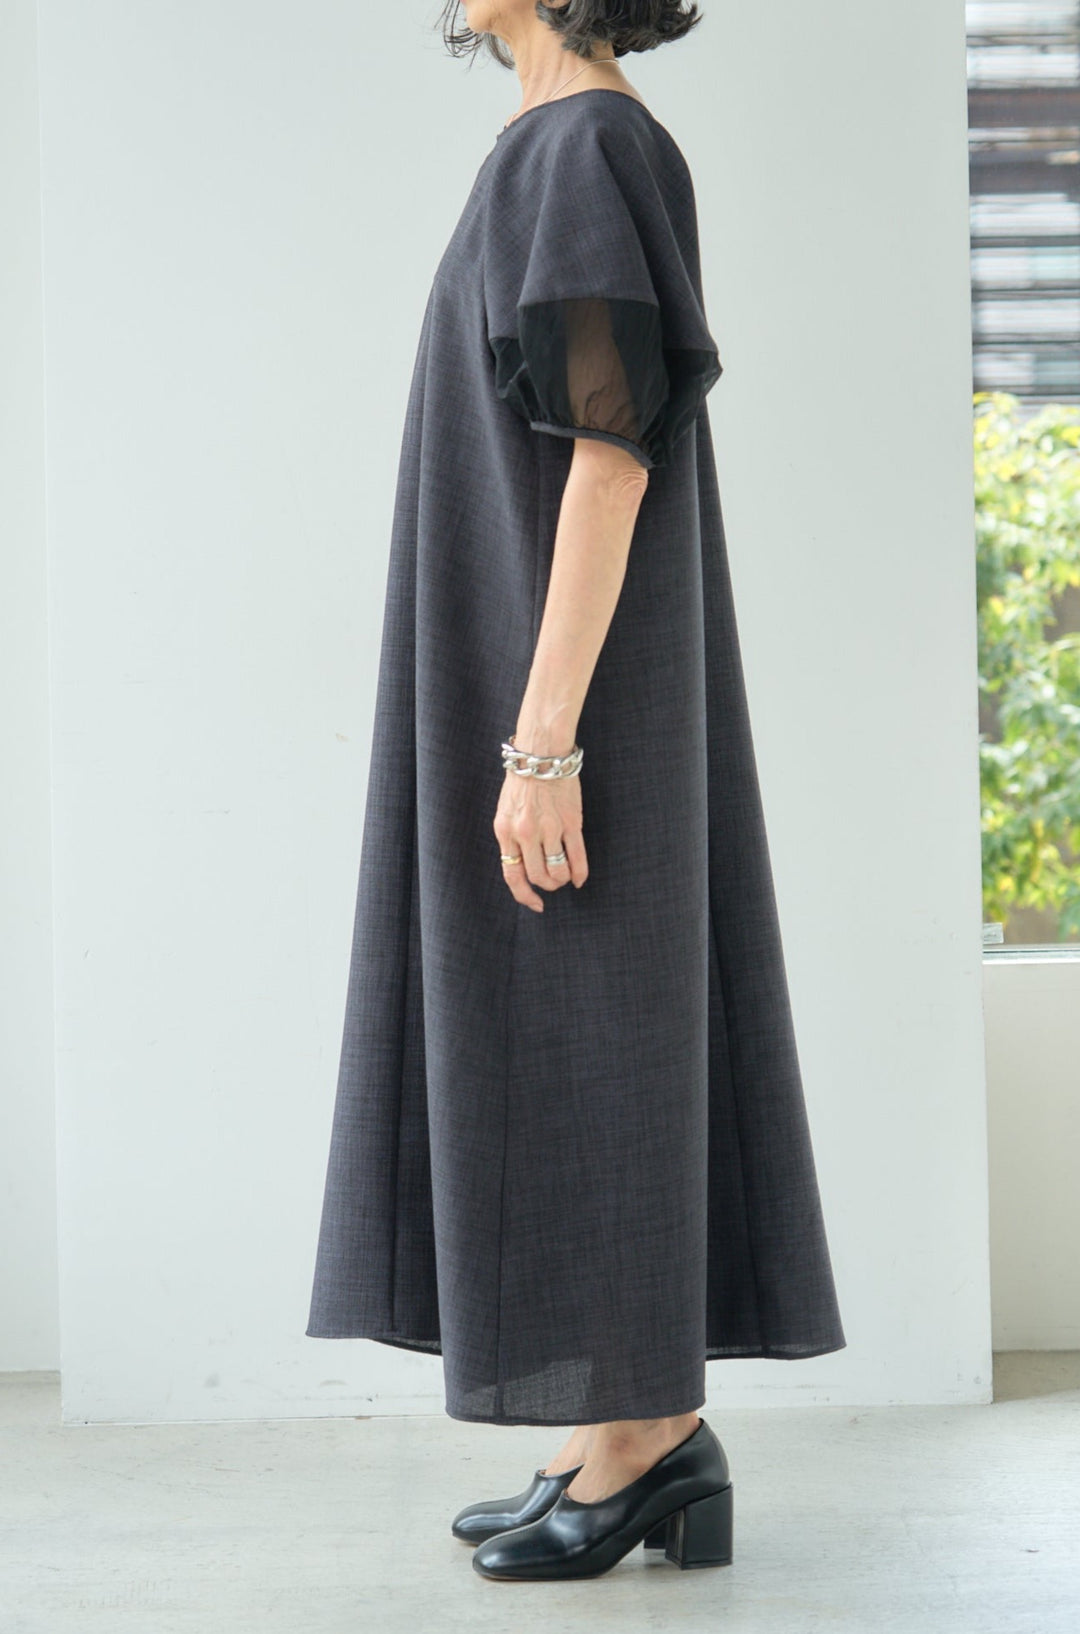 Linen-like dress with sheer sleeves